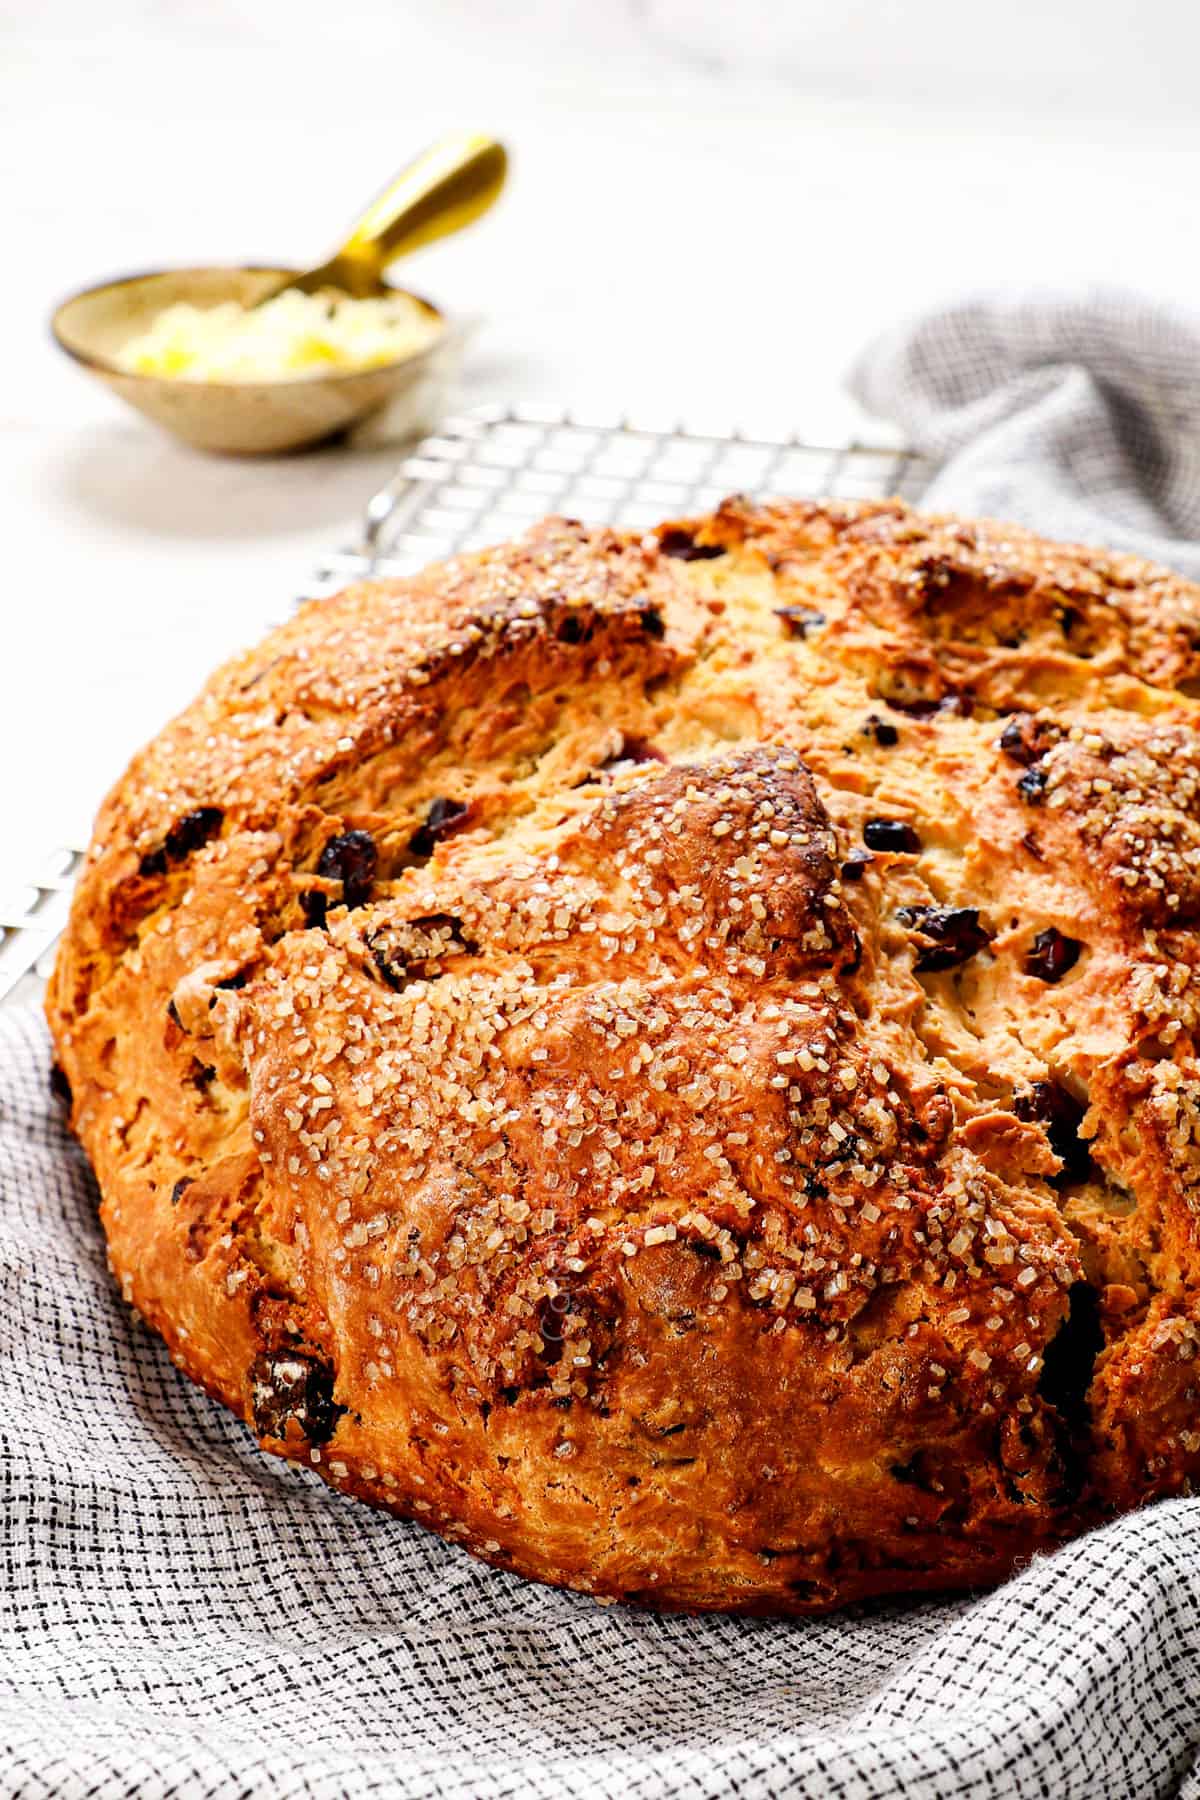 Cooling traditional irish soda bread recipe on a wire baking sheet